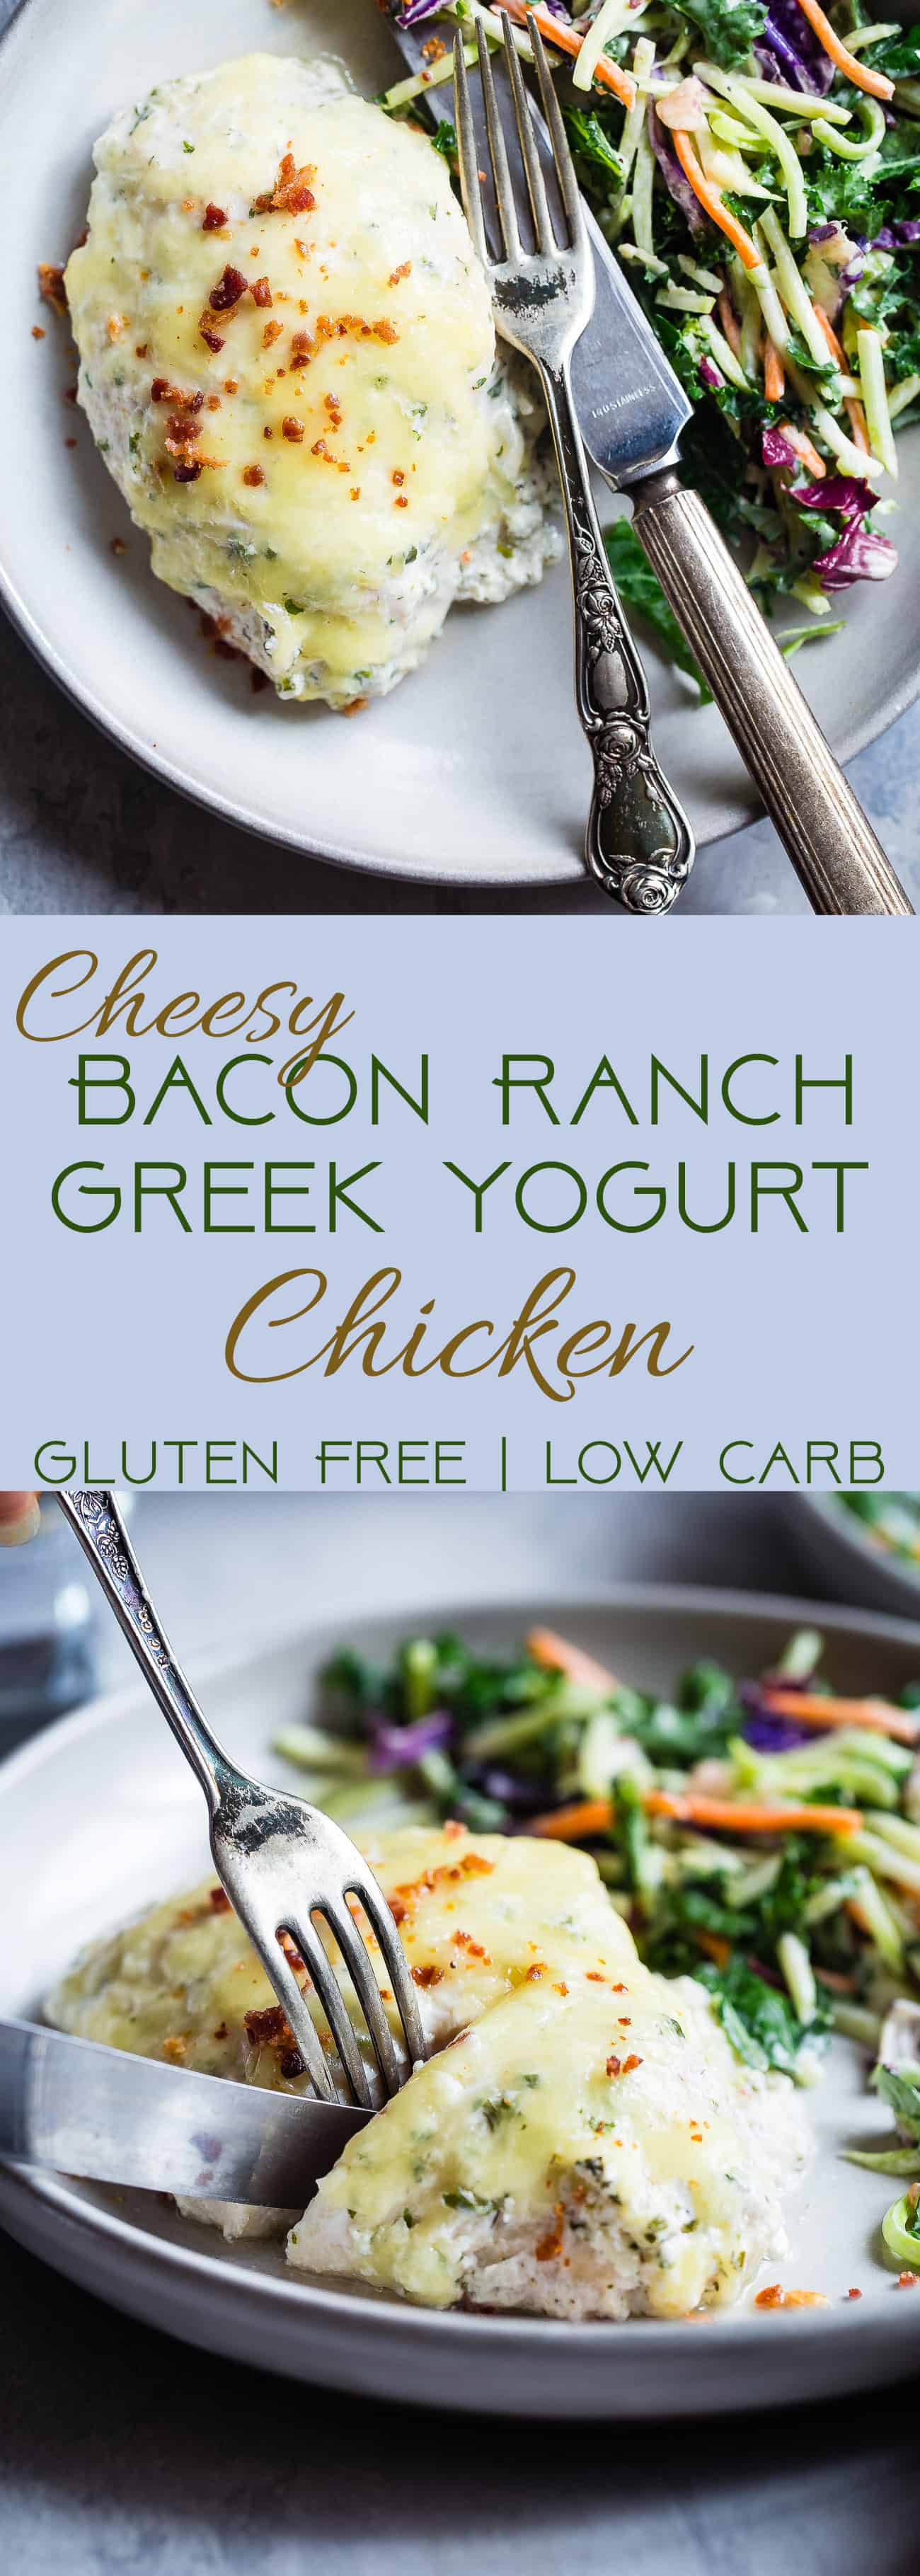 Cheesy Bacon Ranch Baked Greek Yogurt Chicken - A protein PACKED, super easy weeknight dinner that the whole family will love! It's healthy, gluten free, low carb and keto friendly too! | #Foodfaithfitness | #glutenfree #kidfriendly #keto #lowcarb